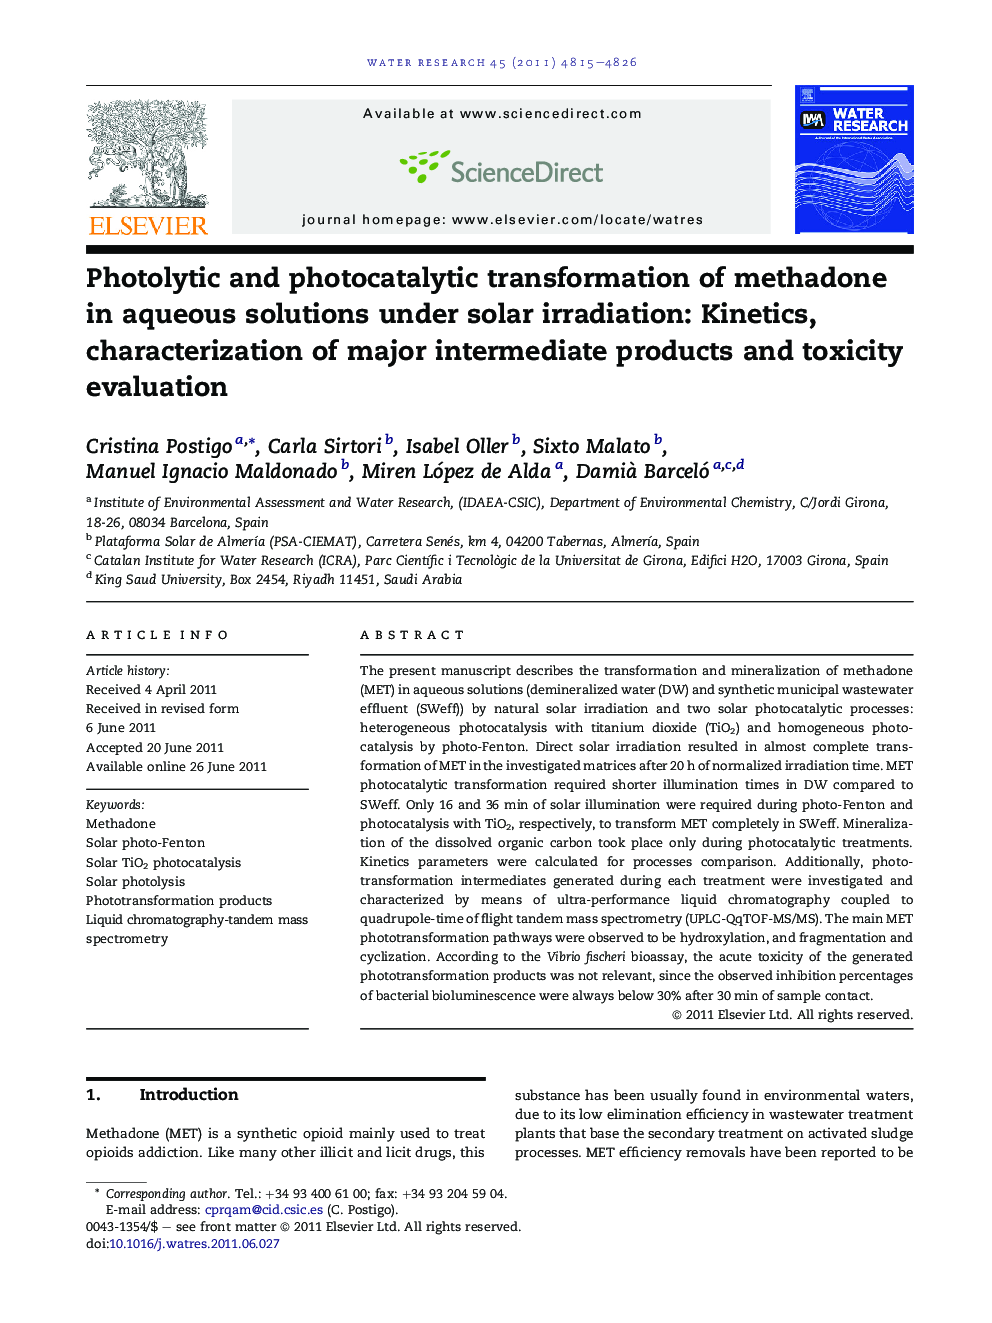 Photolytic and photocatalytic transformation of methadone in aqueous solutions under solar irradiation: Kinetics, characterization of major intermediate products and toxicity evaluation